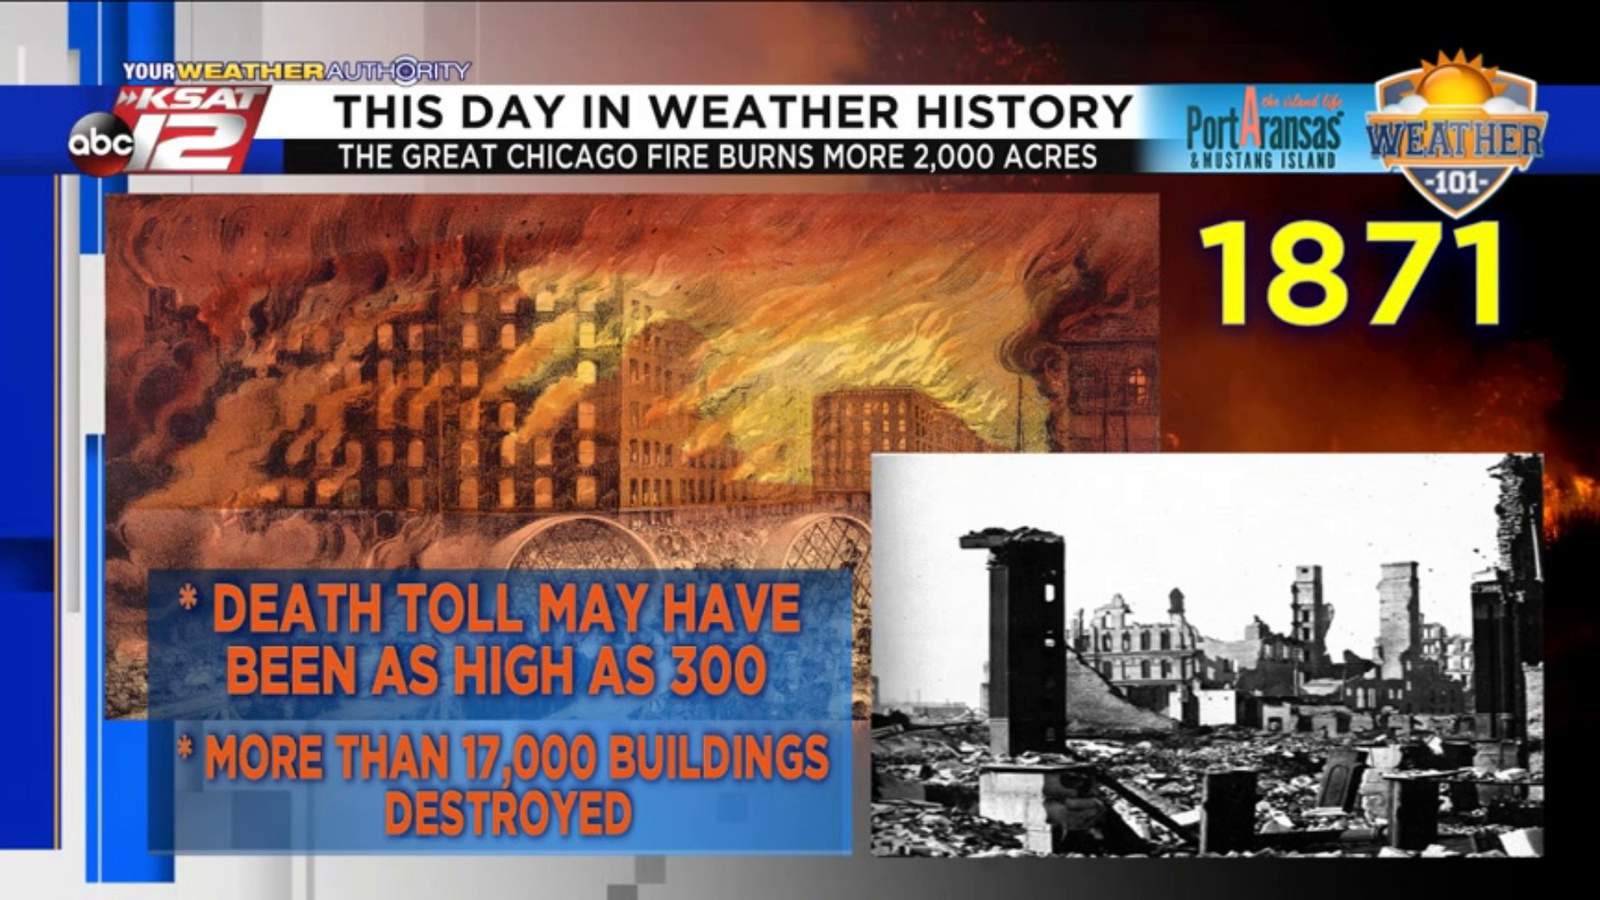 This Day in Weather History: October 8th